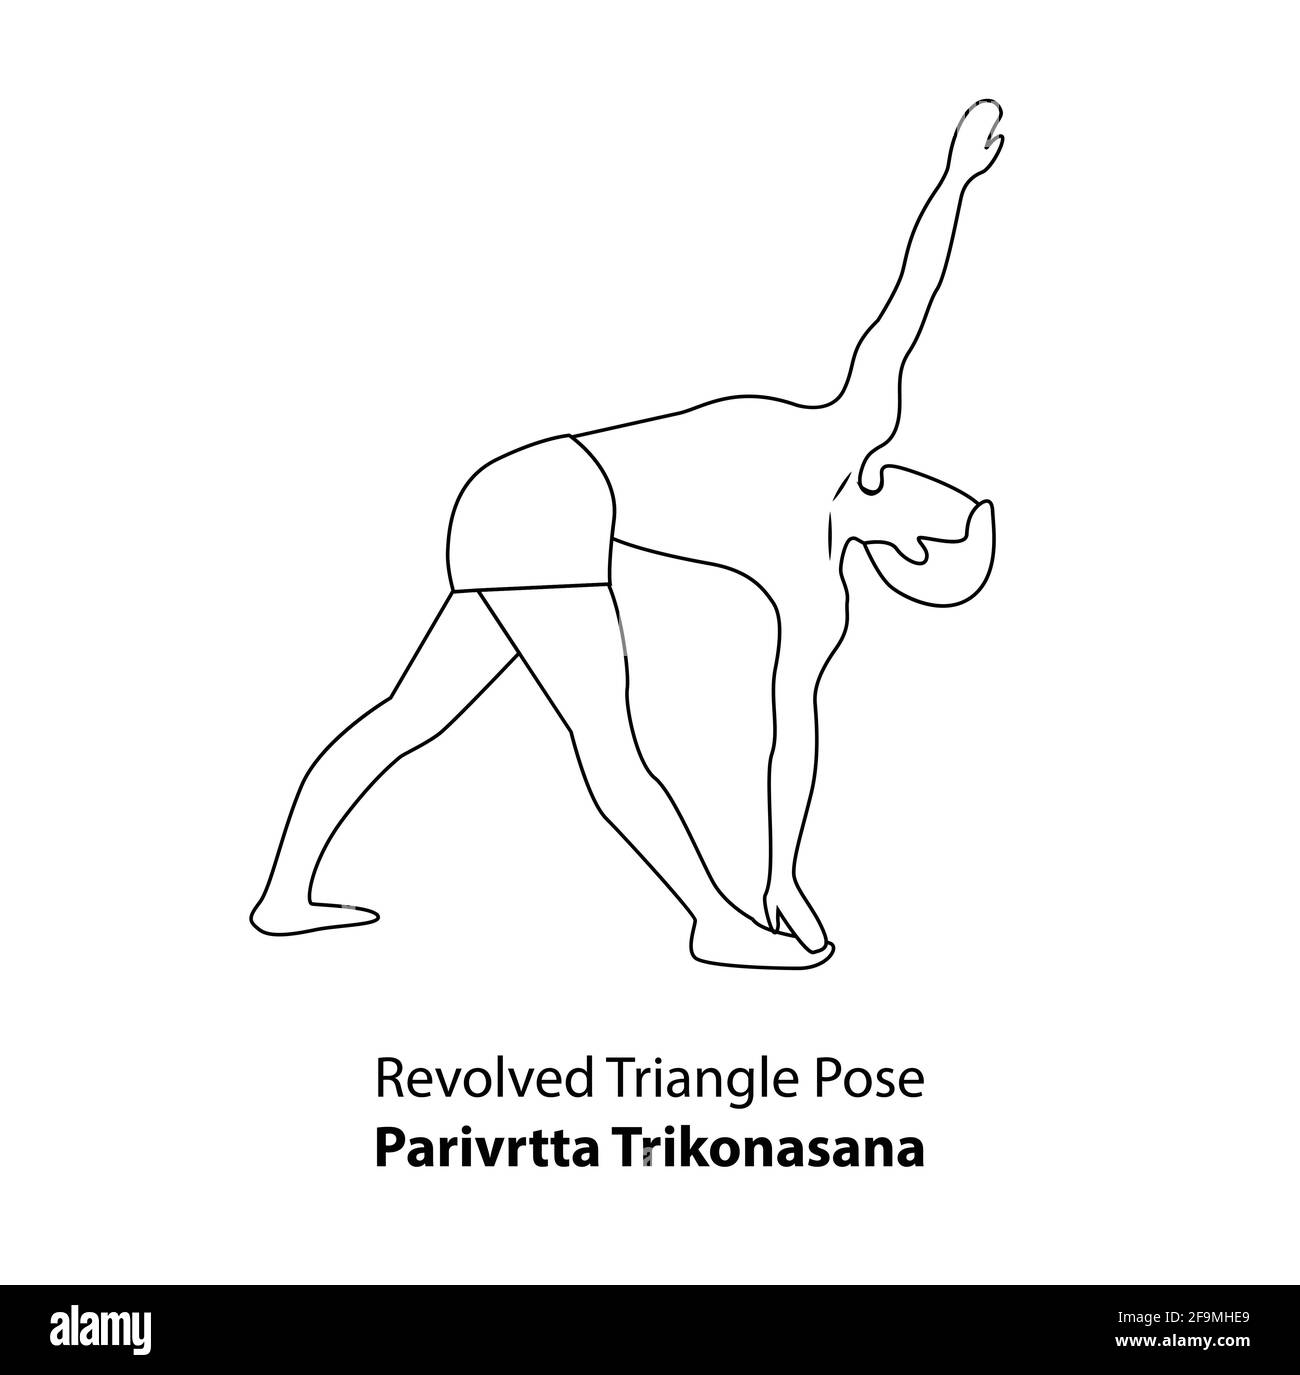 Best Revolved triangle pose Illustration download in PNG & Vector format